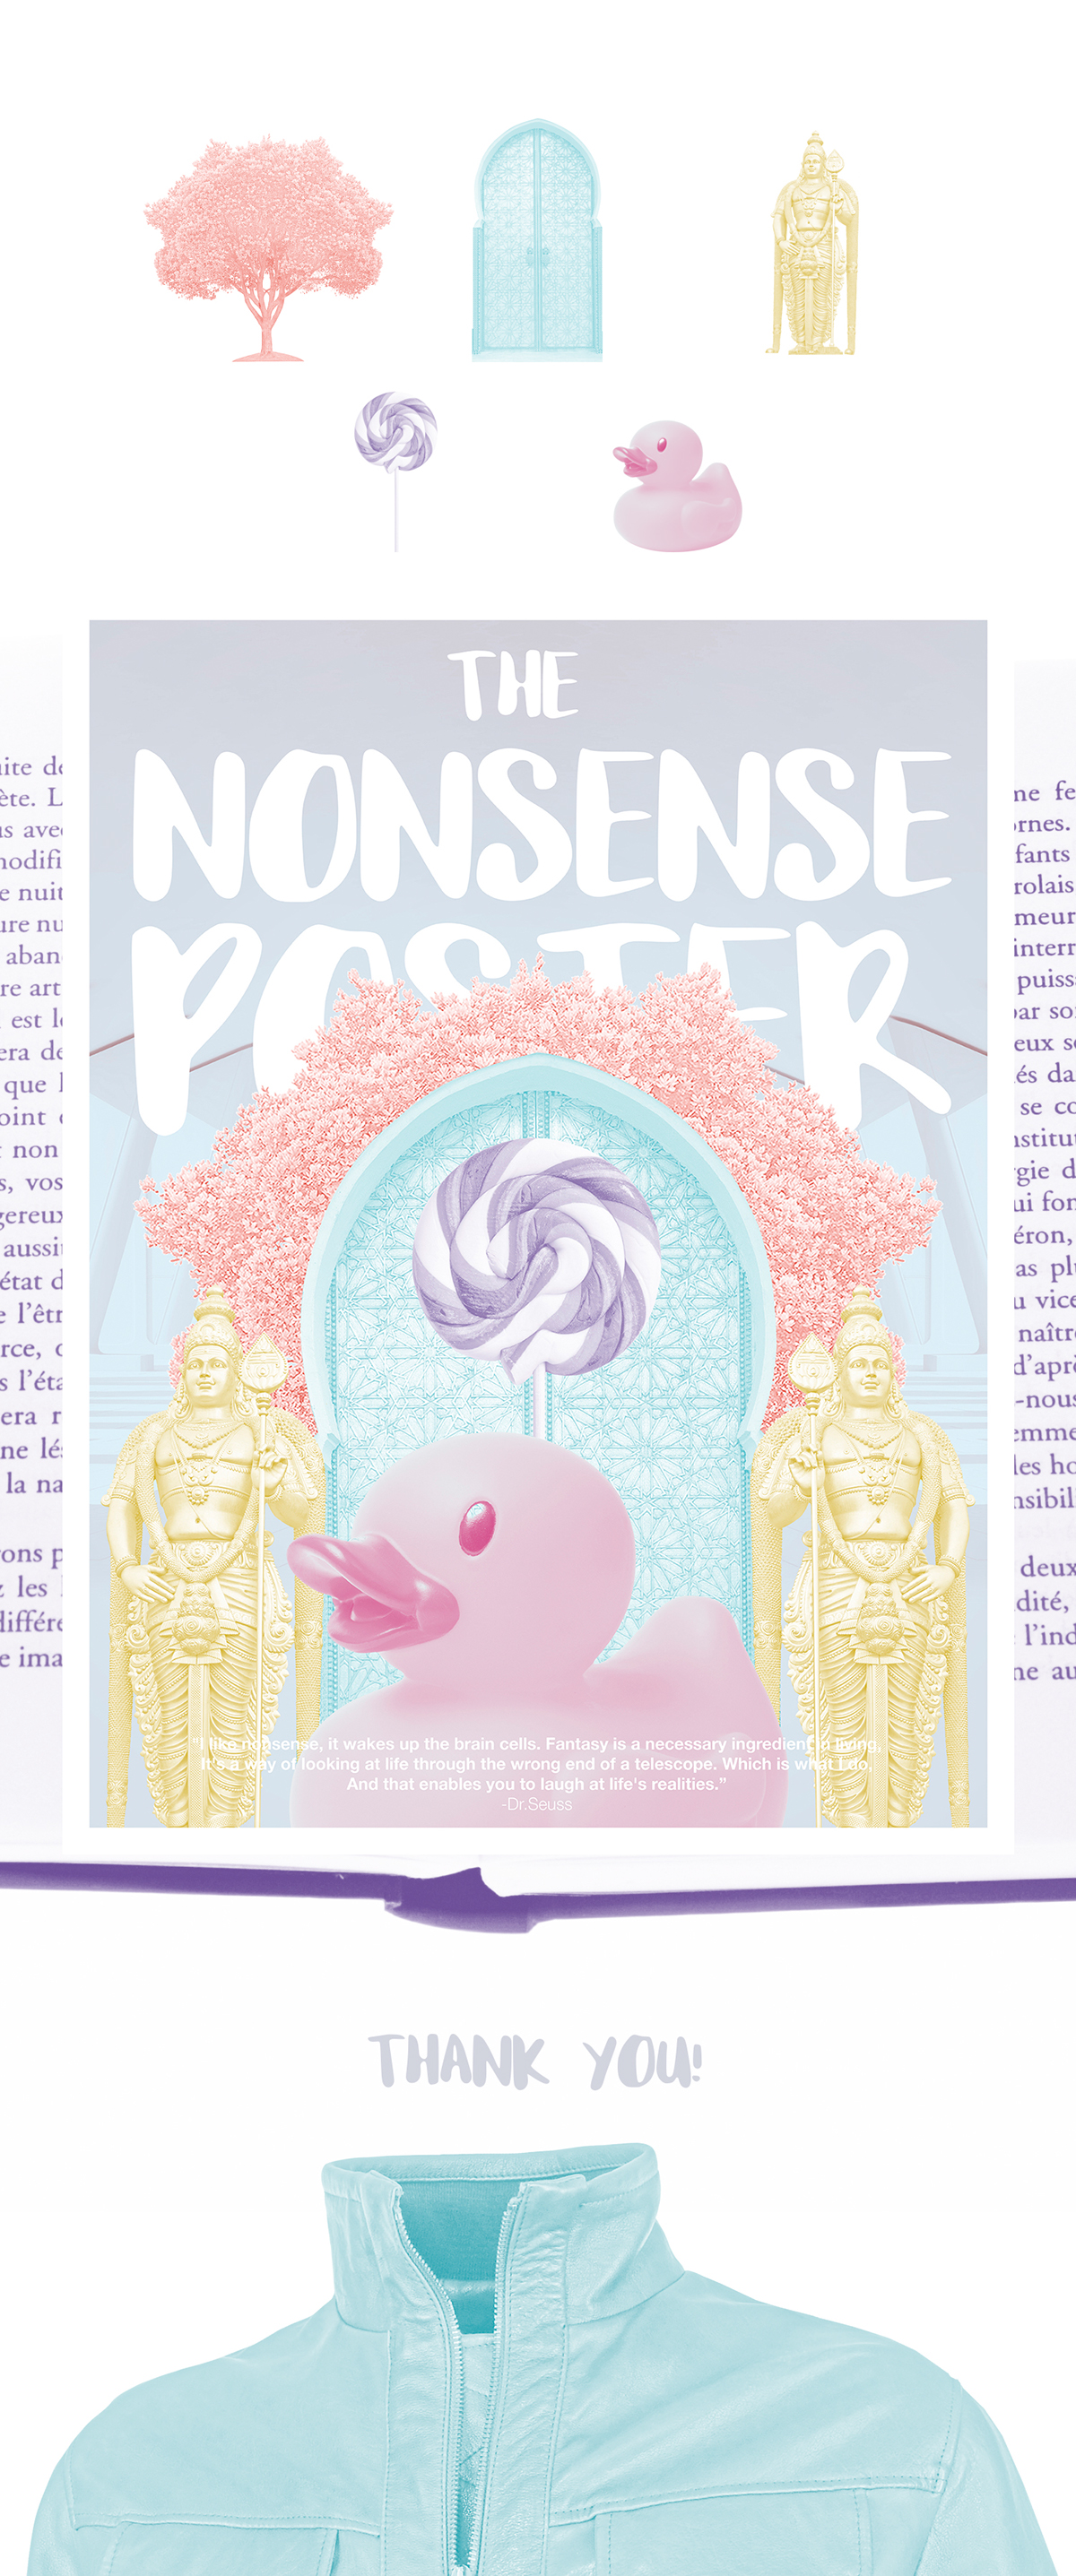 Nonsense poster posters Dr Suess quote colors pastel Treatment momo mohammed mohammed fathi